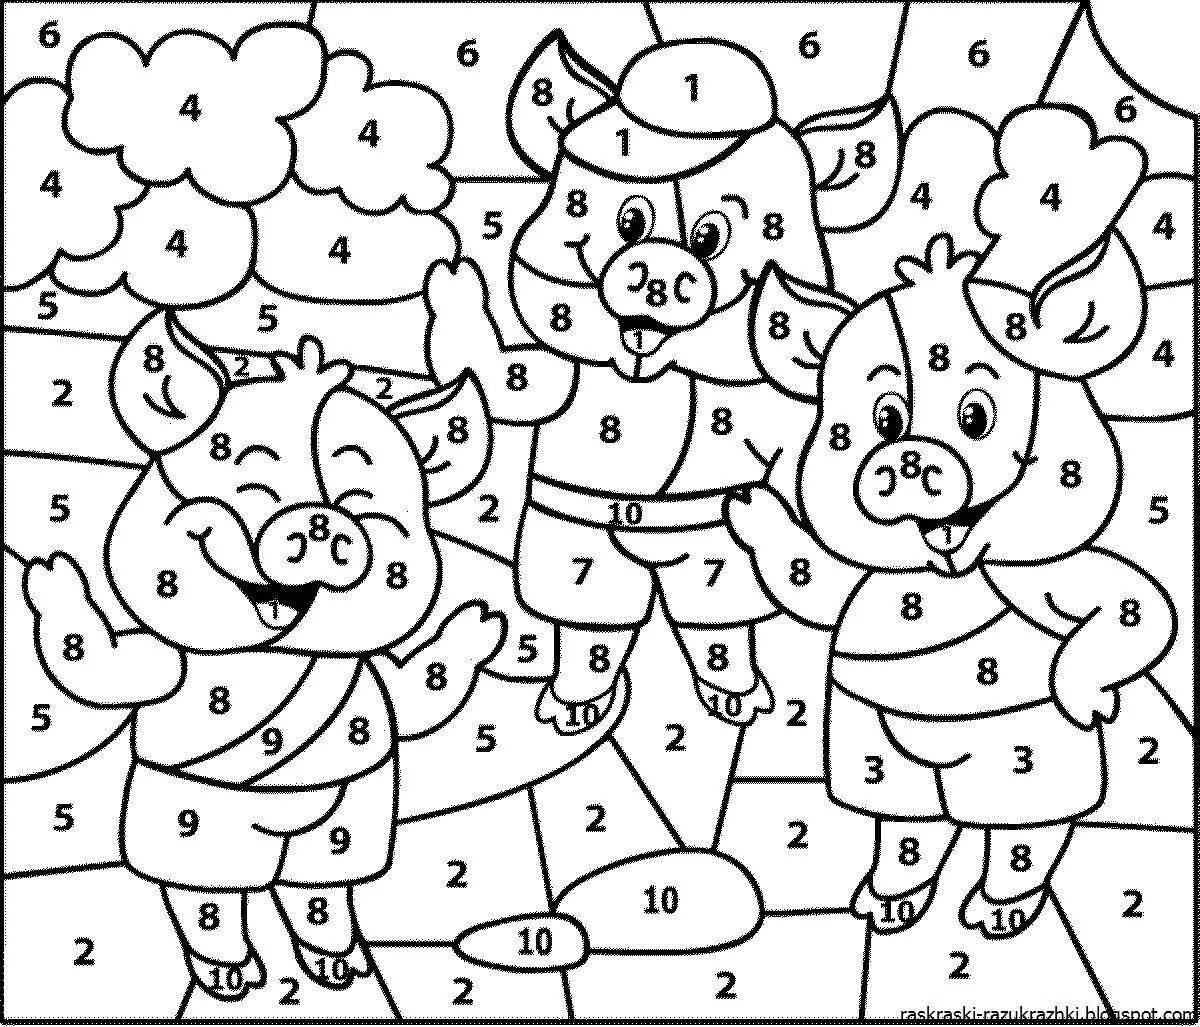 Fancy spell coloring page for 7-8 year olds